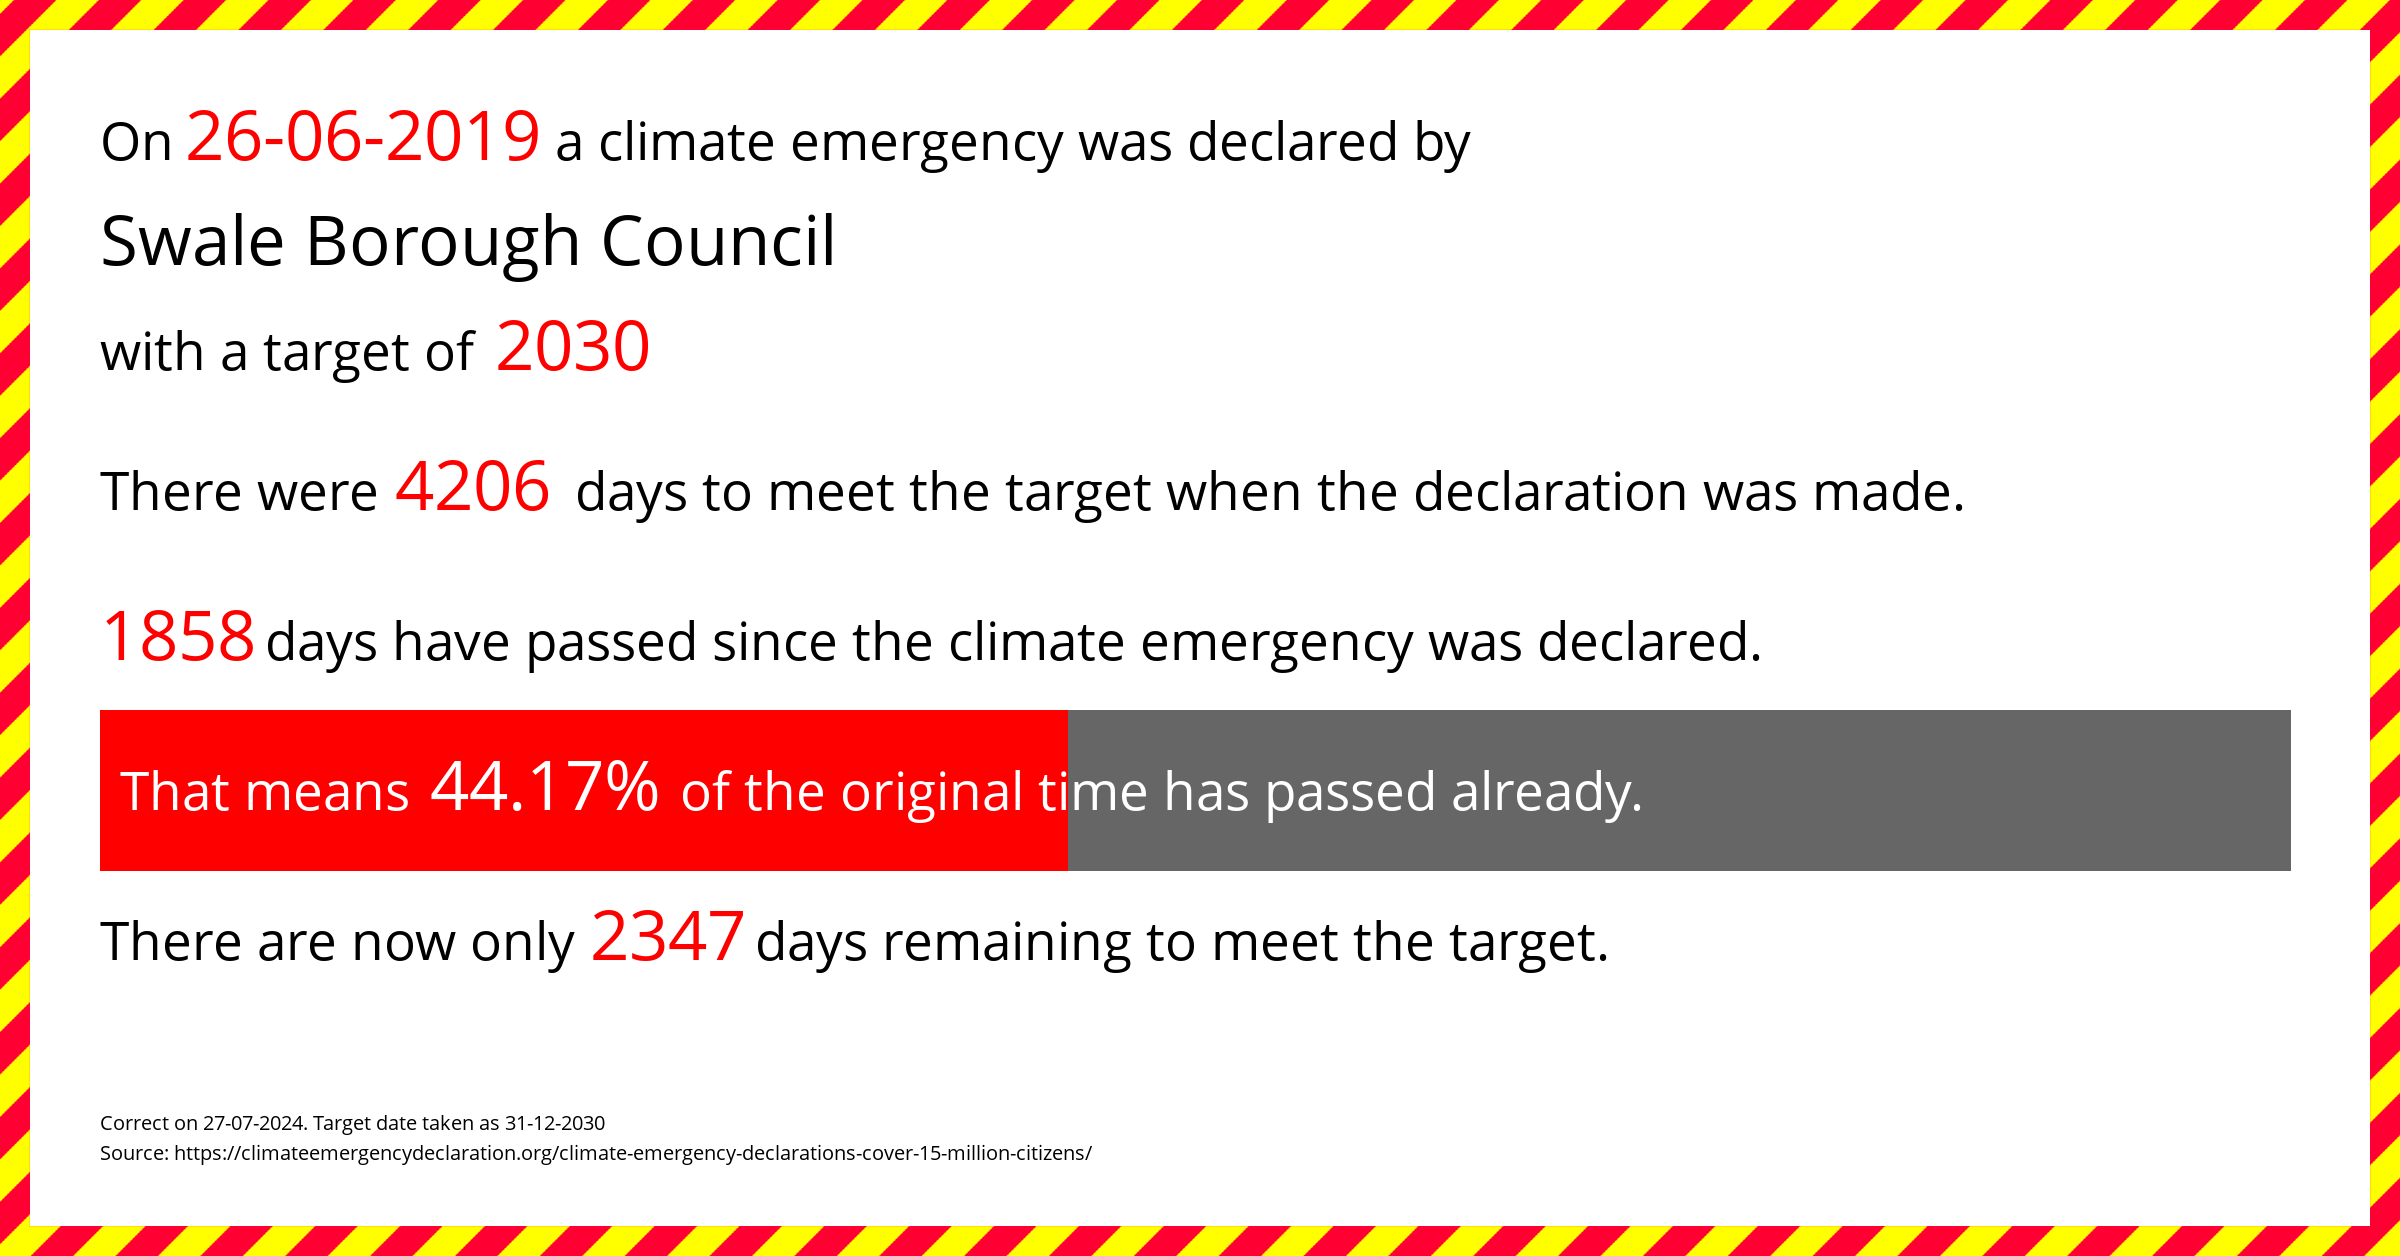 Swale Borough Council declared a Climate emergency on Wednesday 26th June 2019, with a target of 2030.